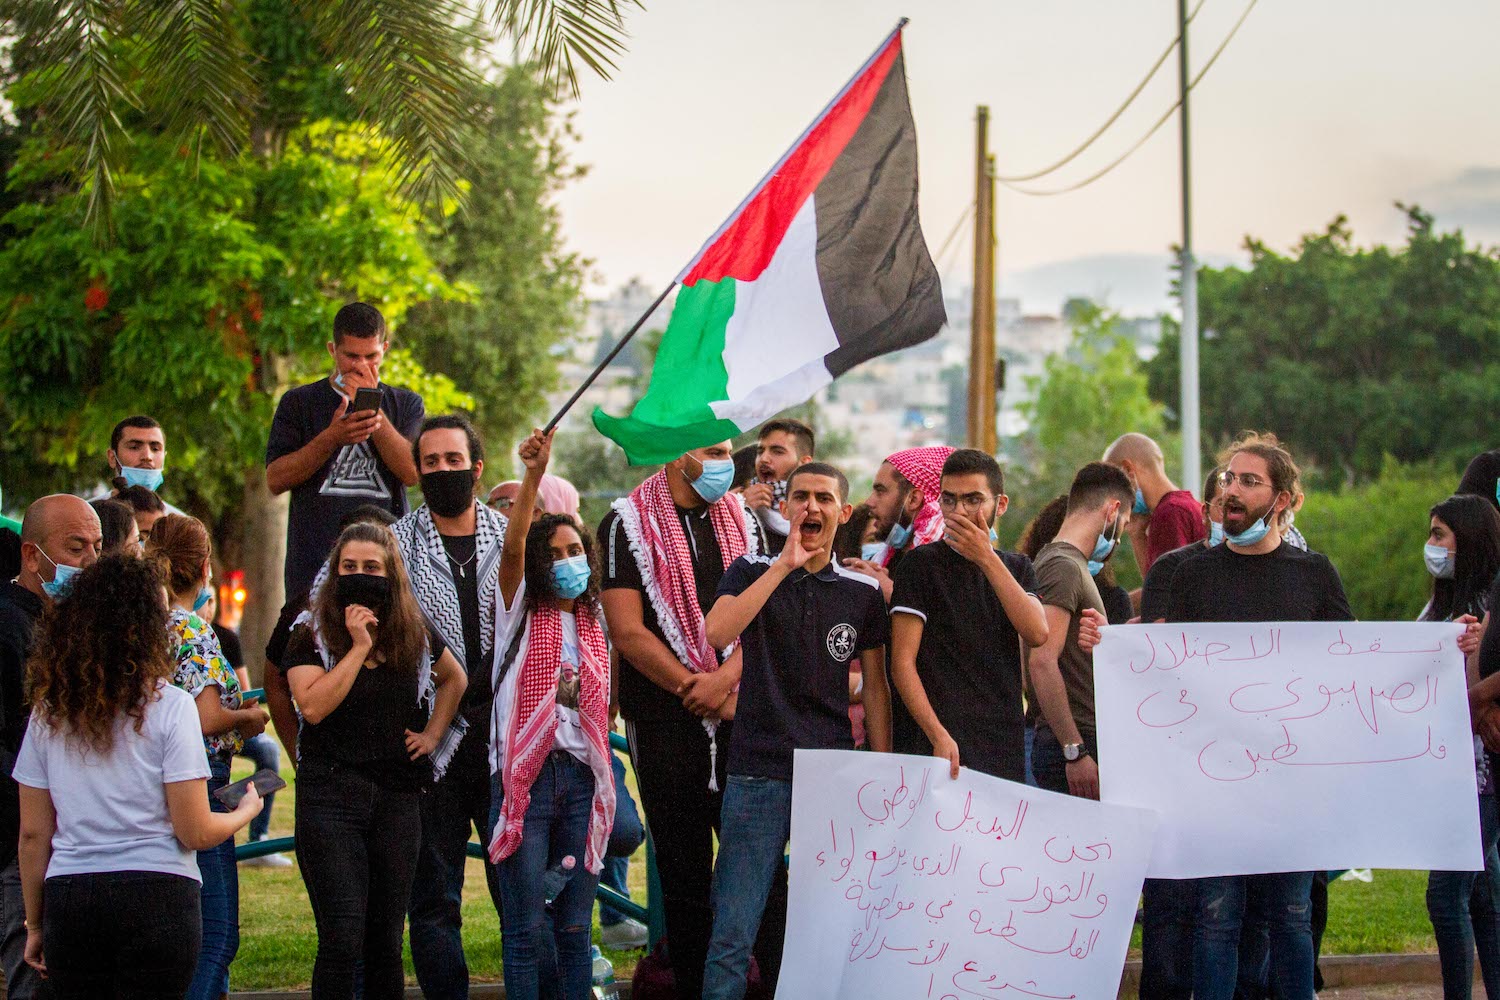 Palestinian citizens protest against Israel's plan to annex parts of the West Bank, near the town of Ar'ara, July 1, 2020. (Flash90)